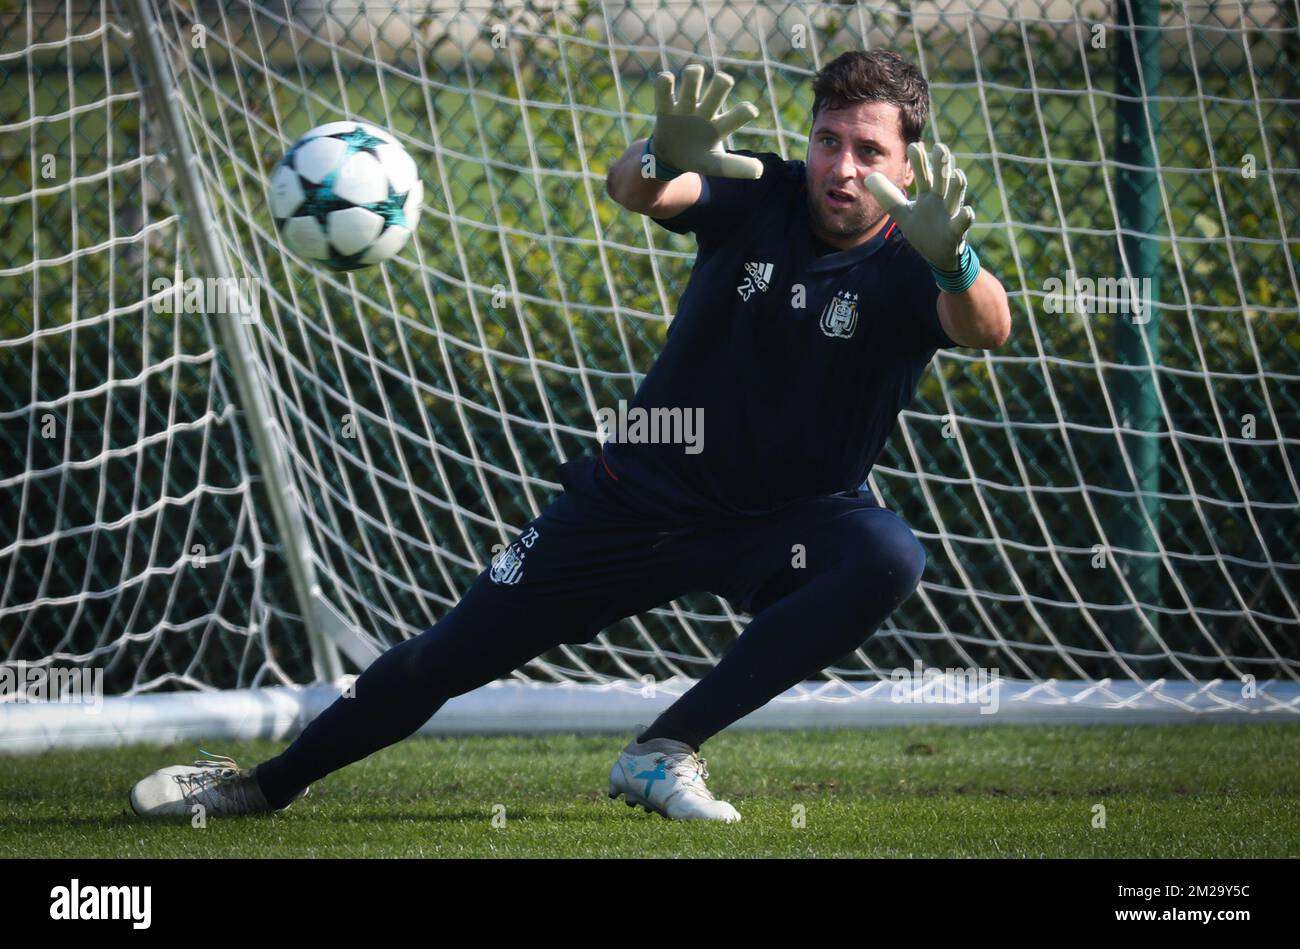 Anderlecht's goalkeeper Frank Boeckx pictured in action during a training session of Belgian soccer team RSC Anderlecht, Tuesday 26 September 2017 in Brussels. Tomorrow Anderlecht is playing a game in the group stage (Group B) of the UEFA Champions League competition against Celtic Glasgow FC (Scotland). BELGA PHOTO VIRGINIE LEFOUR Stock Photo